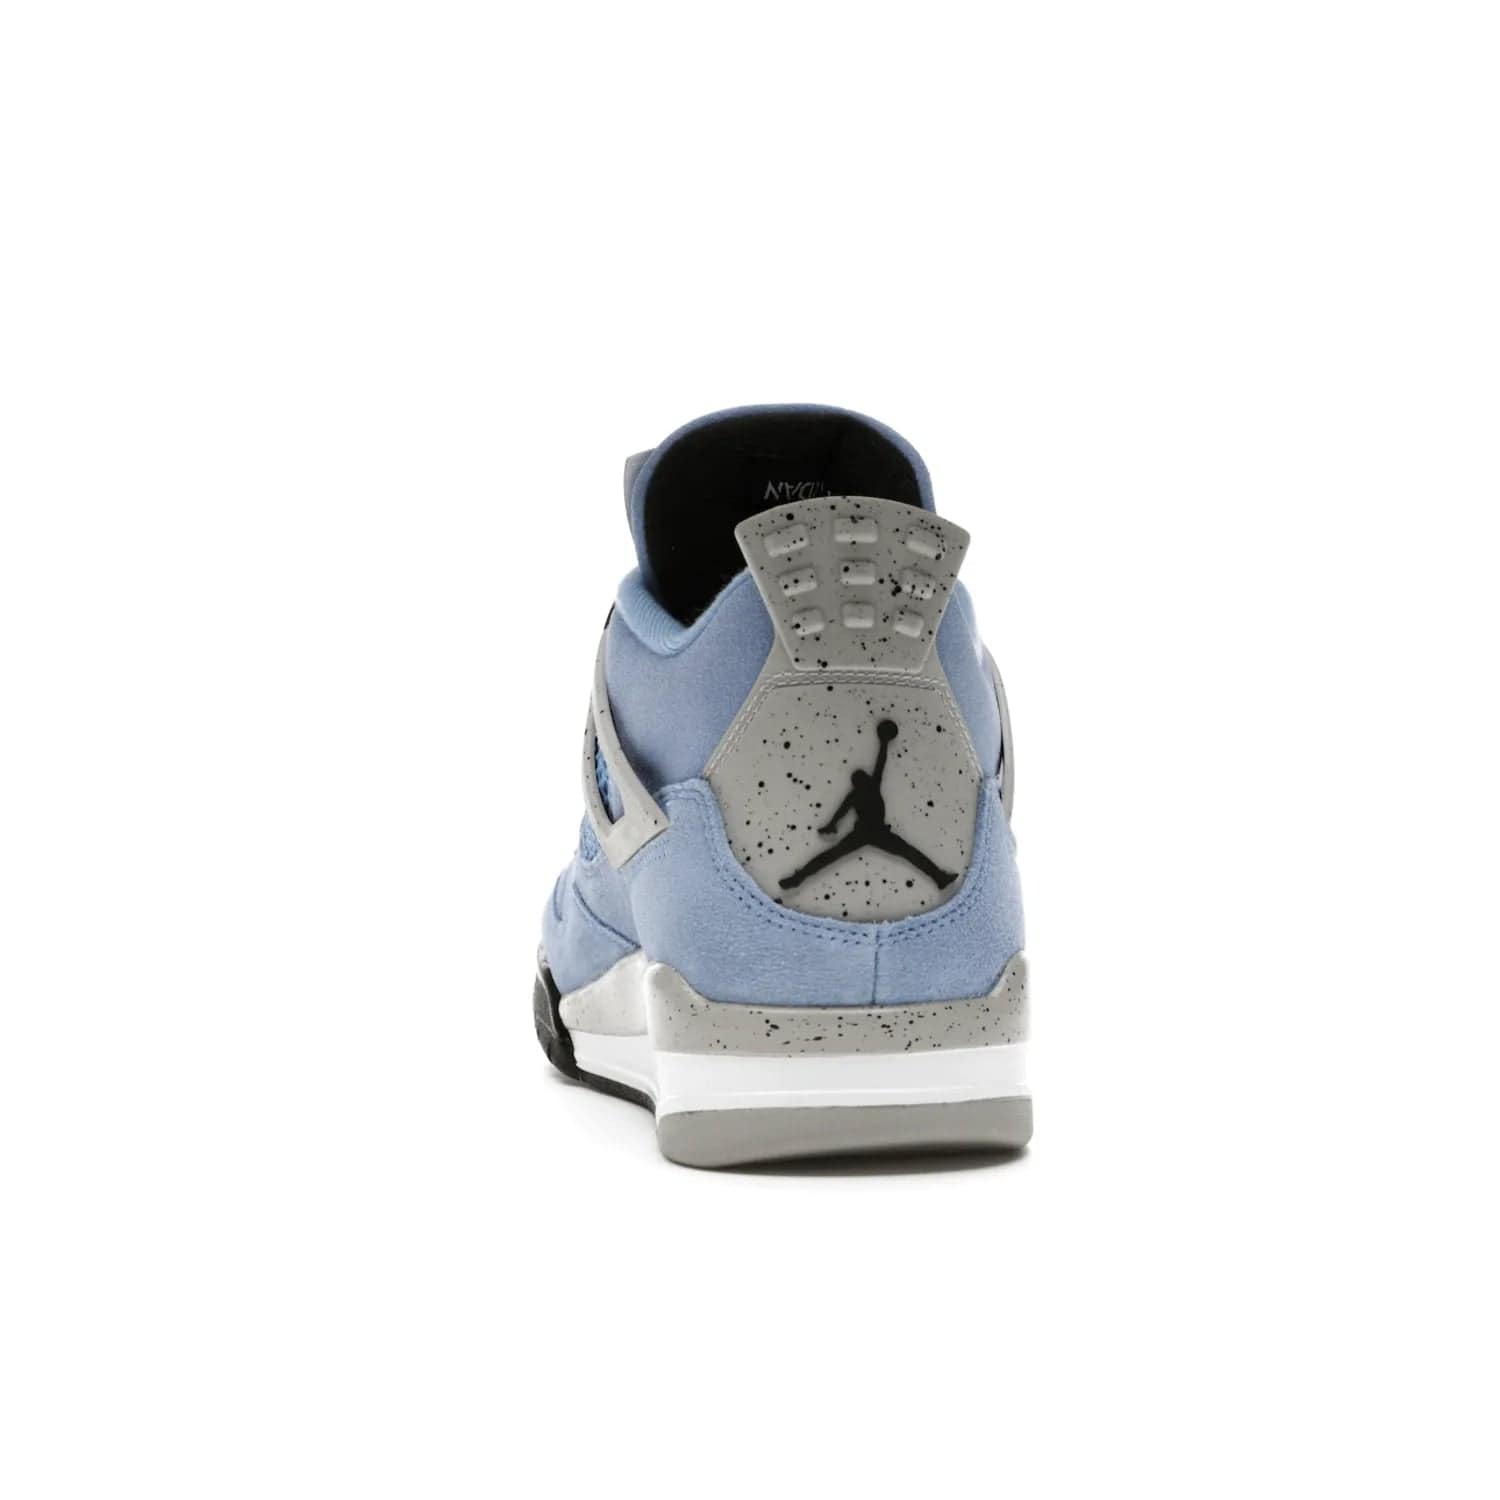 Jordan 4 Retro University Blue - Image 27 - Only at www.BallersClubKickz.com - The Air Jordan 4 University Blue honors MJ's alma mater. Rich University Blue suede, panels of netting, and Cement Grey speckled eyelets give this design an edgy look. Features a black, white and Tech Grey sole with a clear Air unit and two woven labels on the tongue. Jumpman logo & Team Jordan jock tag included. Released April 2021.